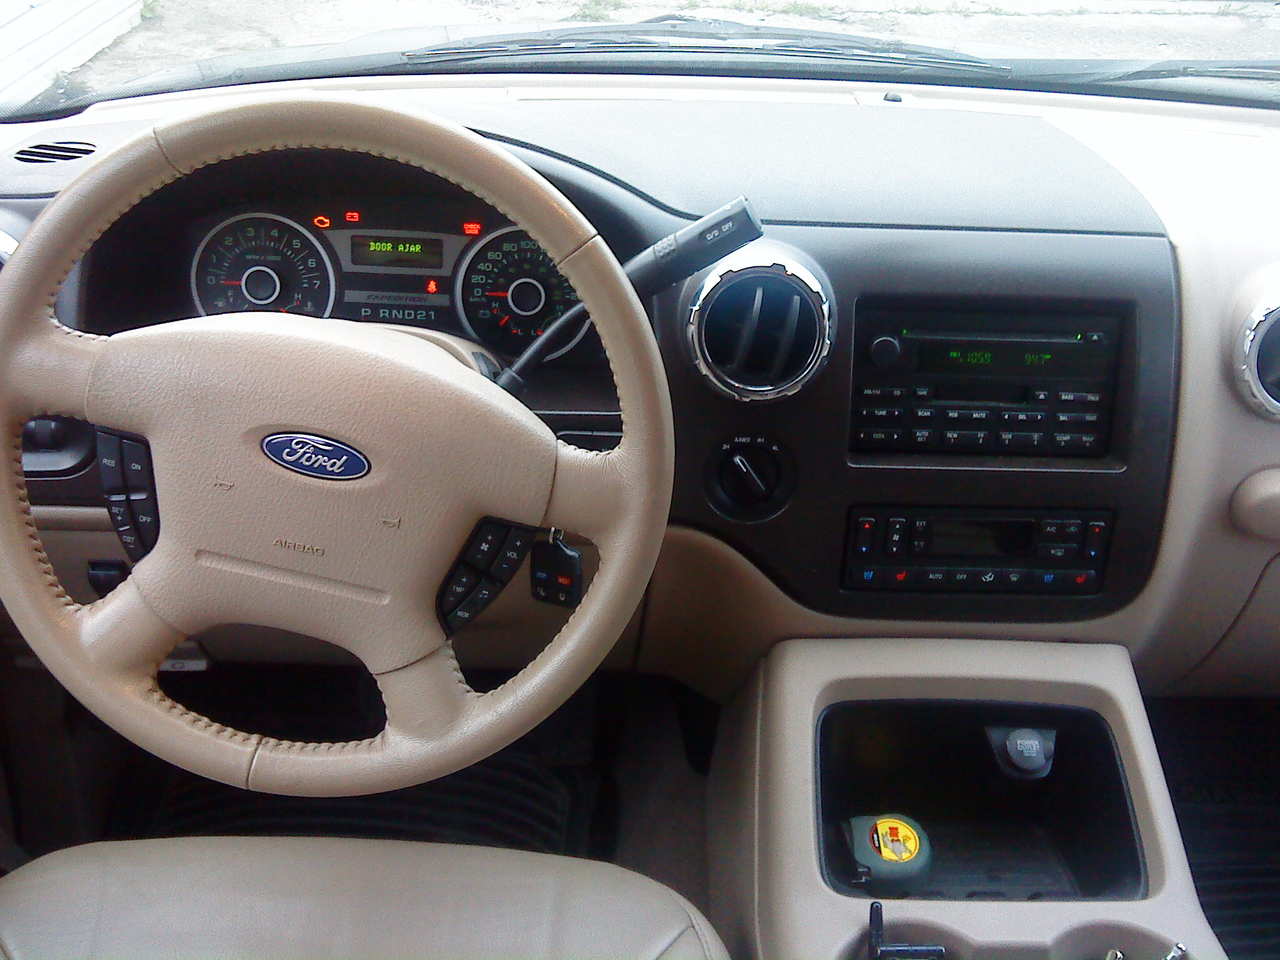 2005 Ford expedition transmission for sale